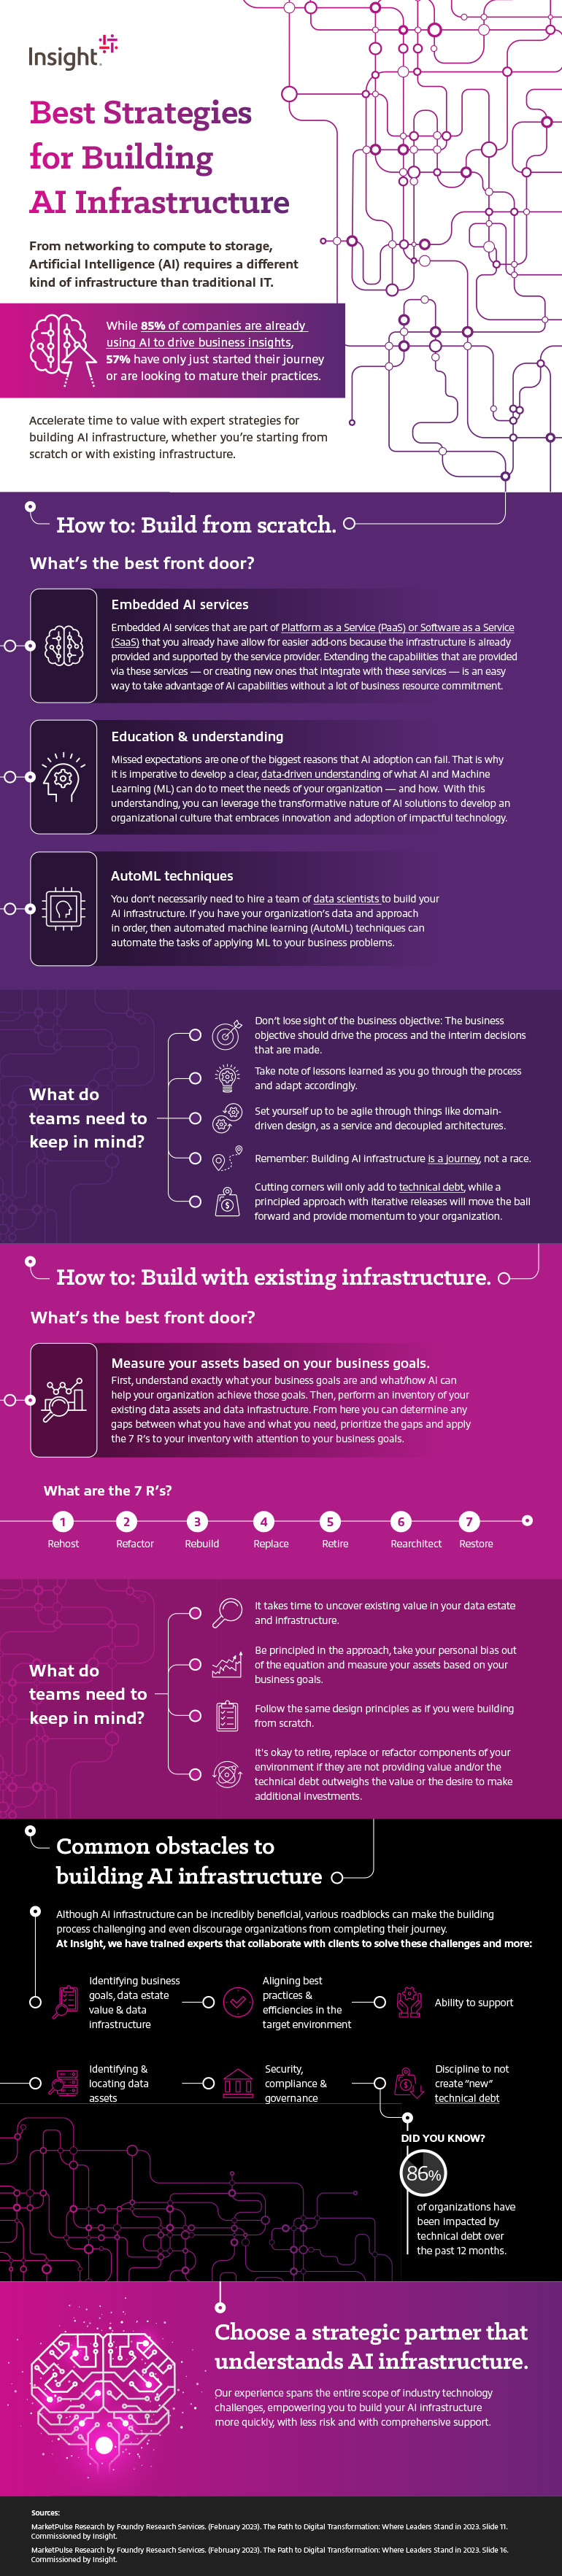 Best Strategies for Building AI Infrastructure infographic